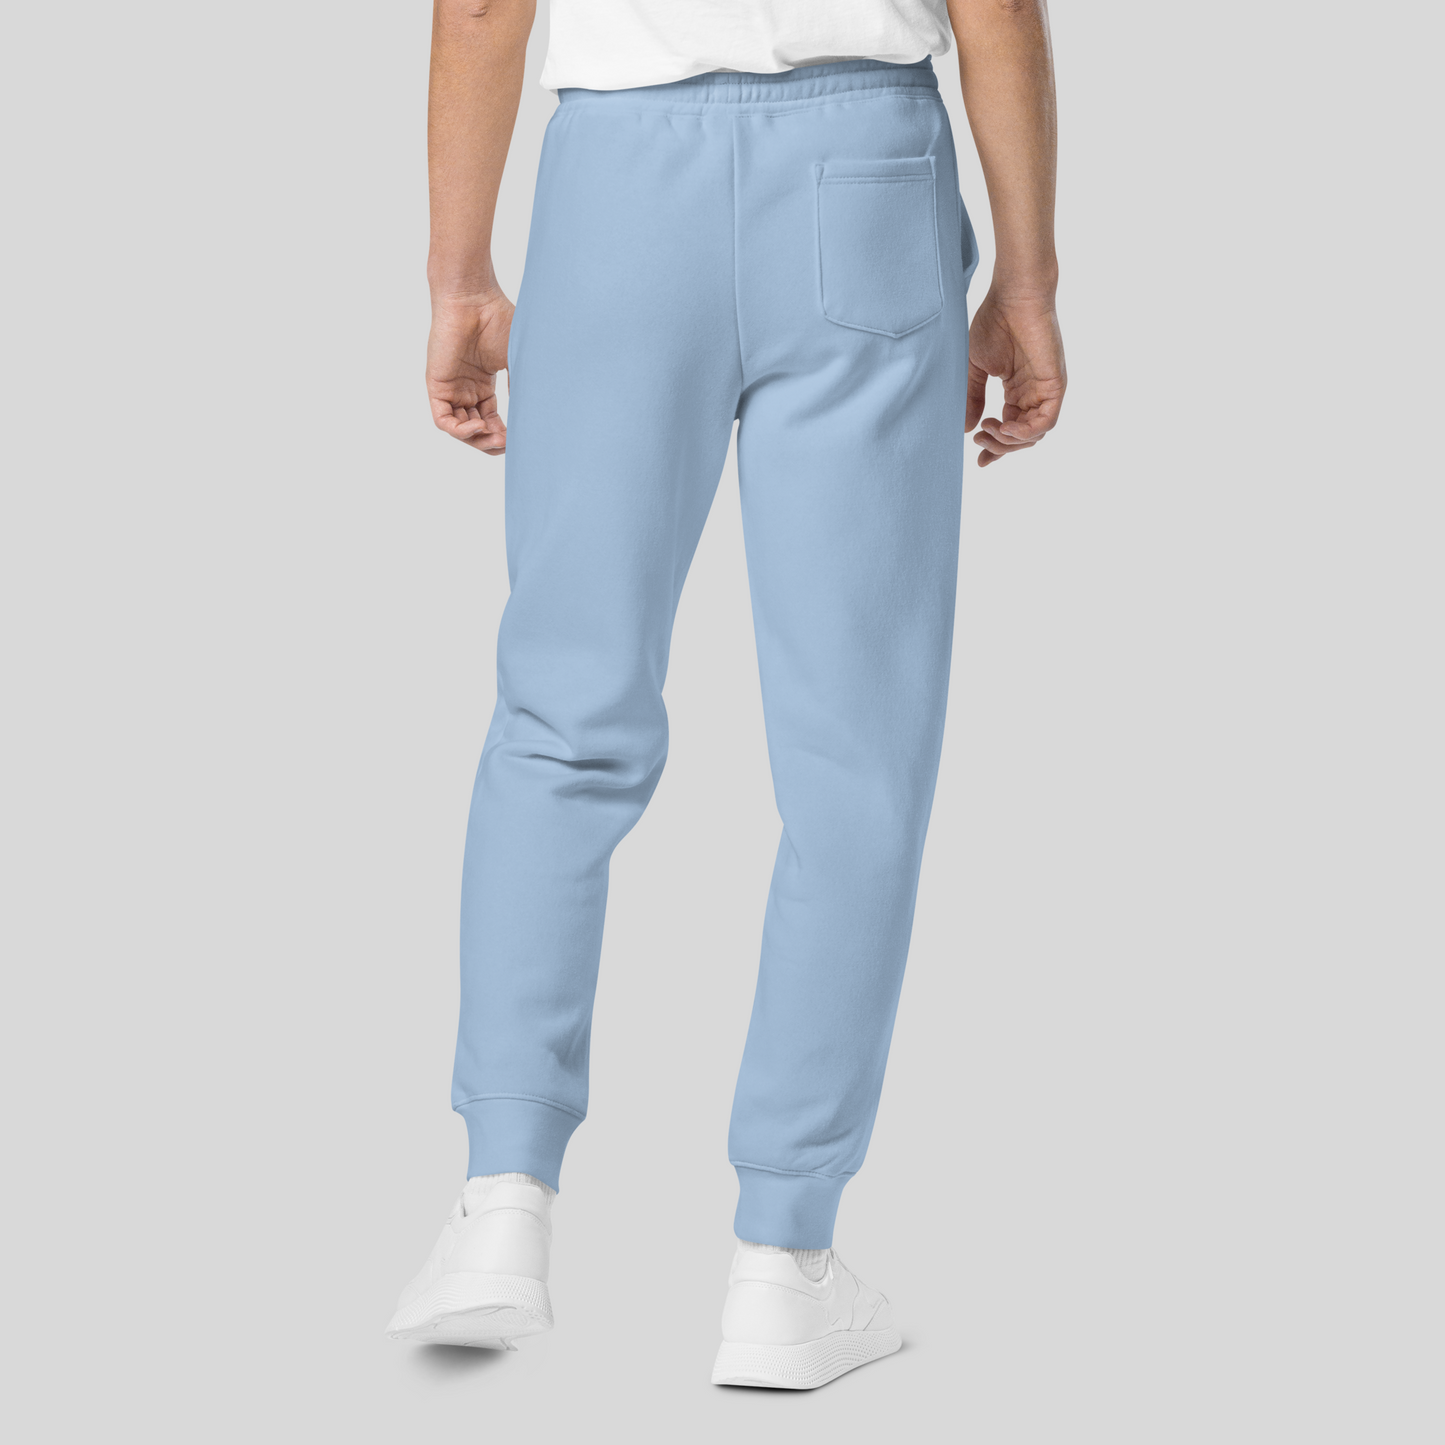 back side of mens light blue joggers with one back pocket on the right side